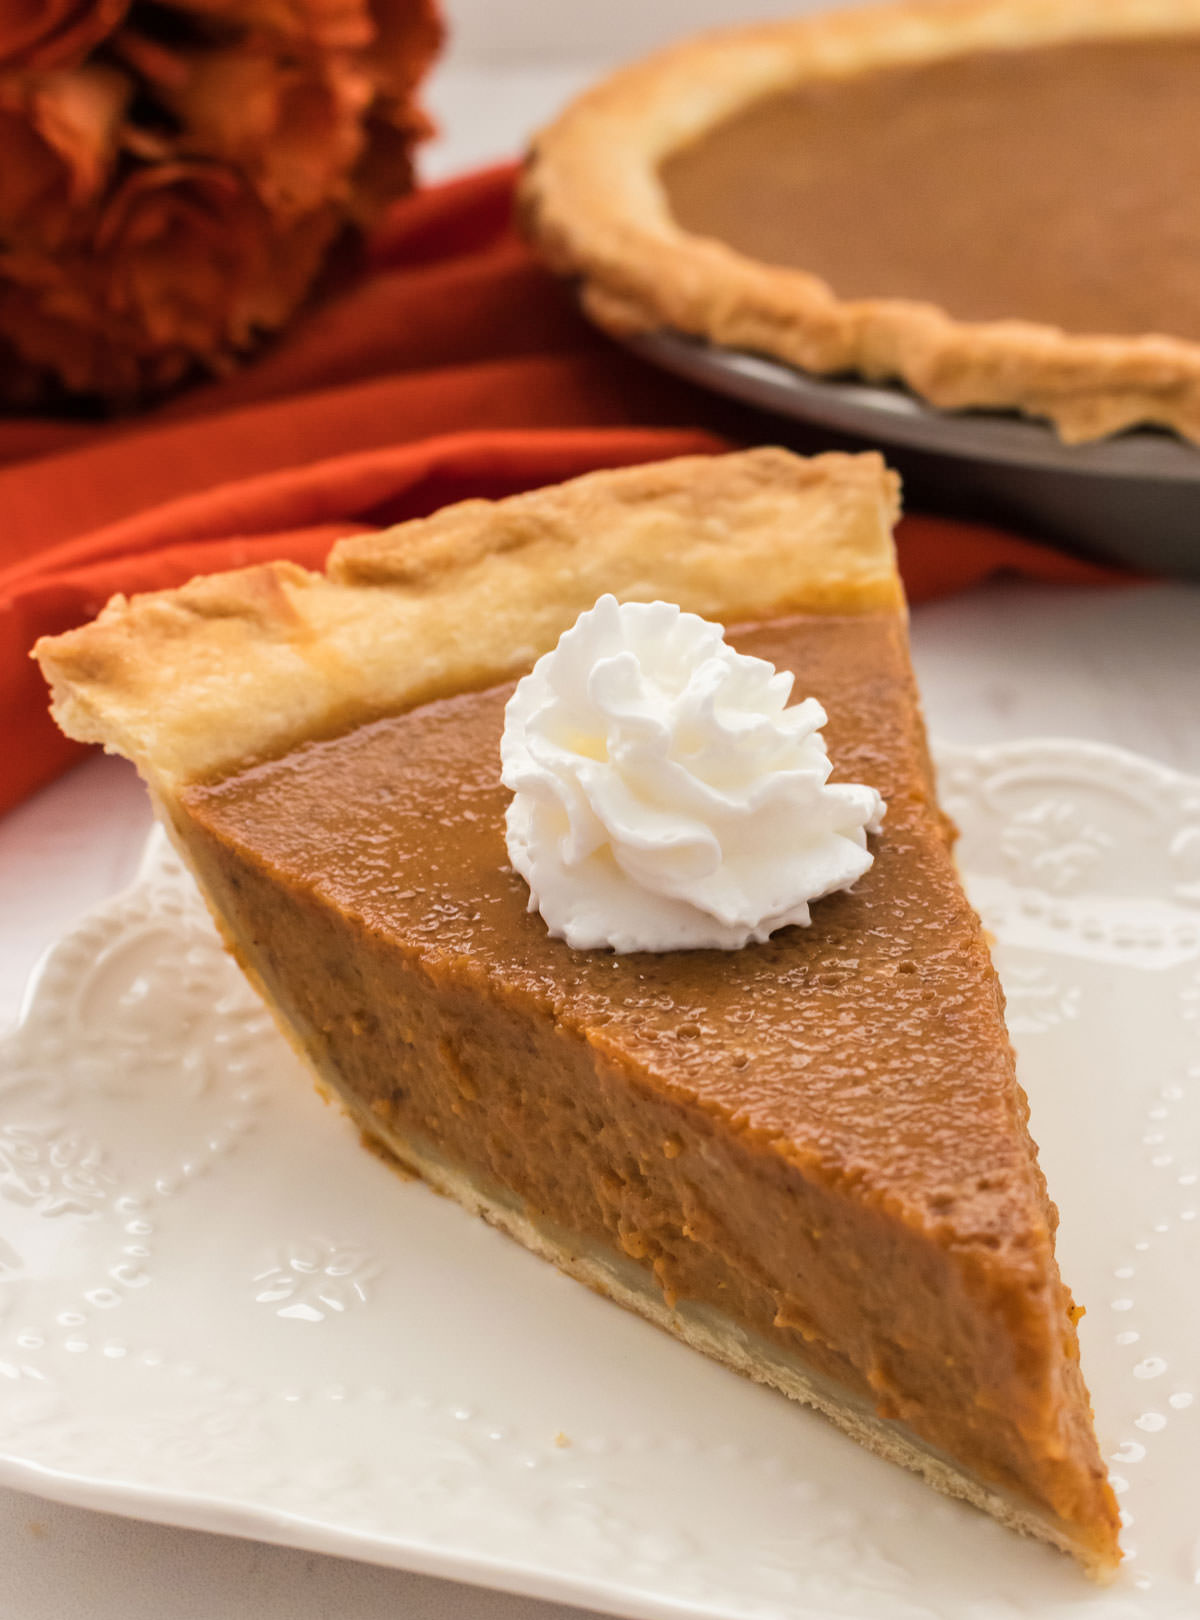 A piece of Homemade Sweet Potato Pie with a dollop of Whipped Cream sitting on a white plate.  